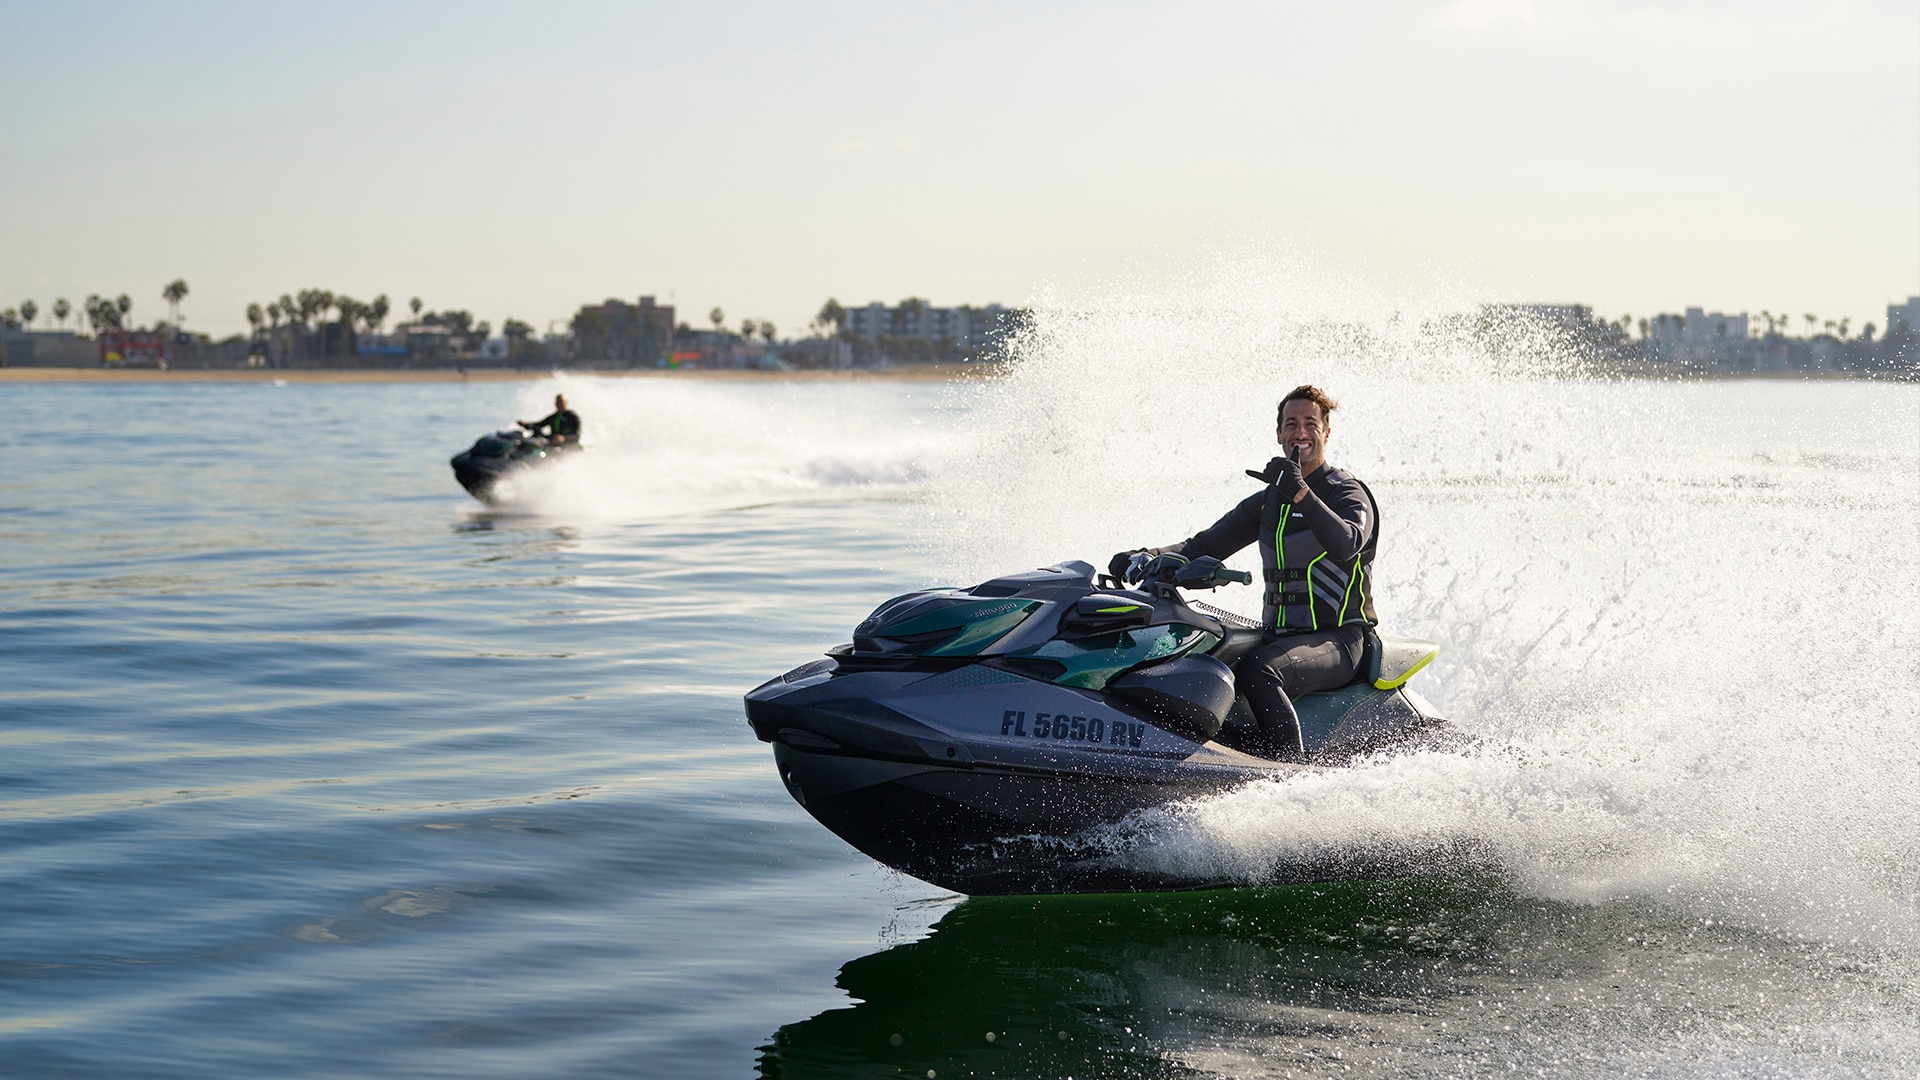 Daniel Ricciardo driving his Sea-Doo personal watercraft with Anthony Radetic catching up to him on his PWC